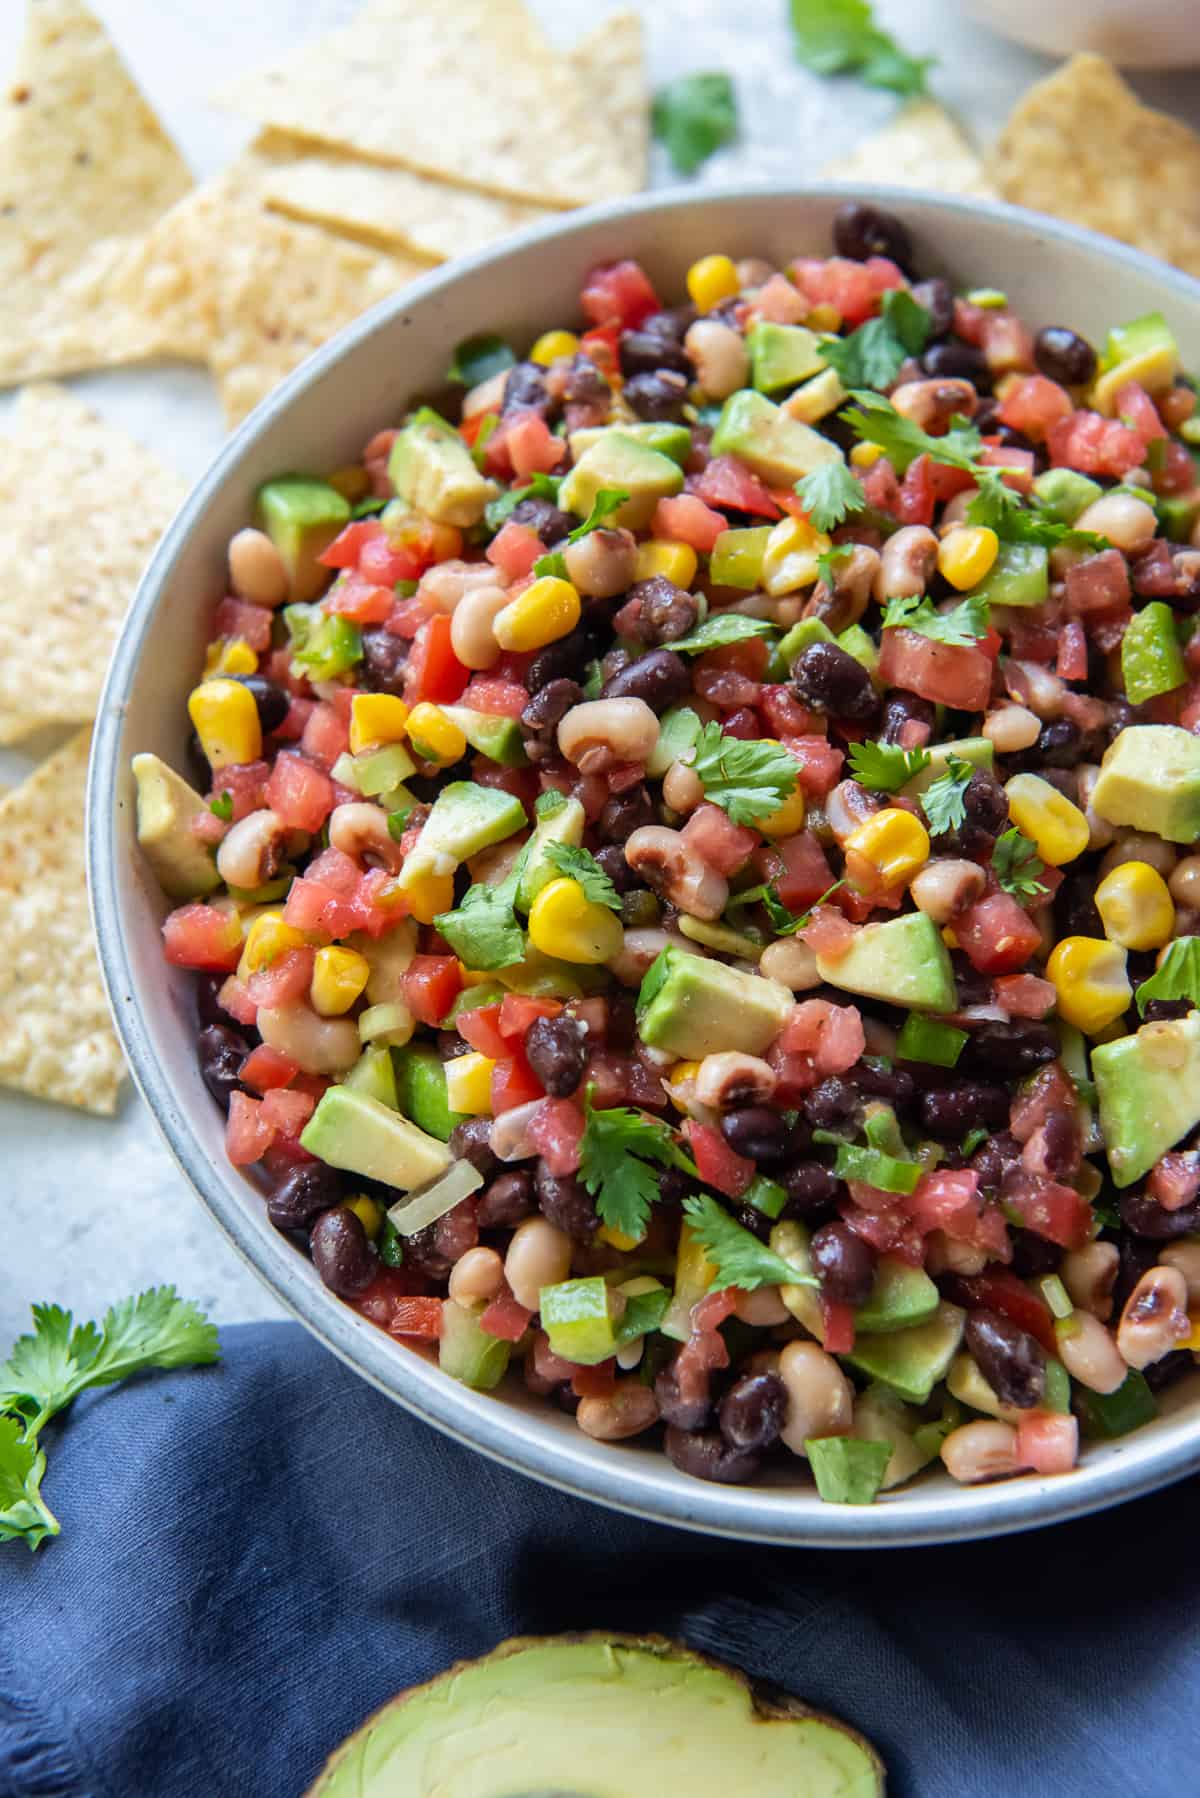 Tomatoes, black eyed peas, corn and other ingredients in a bowl.